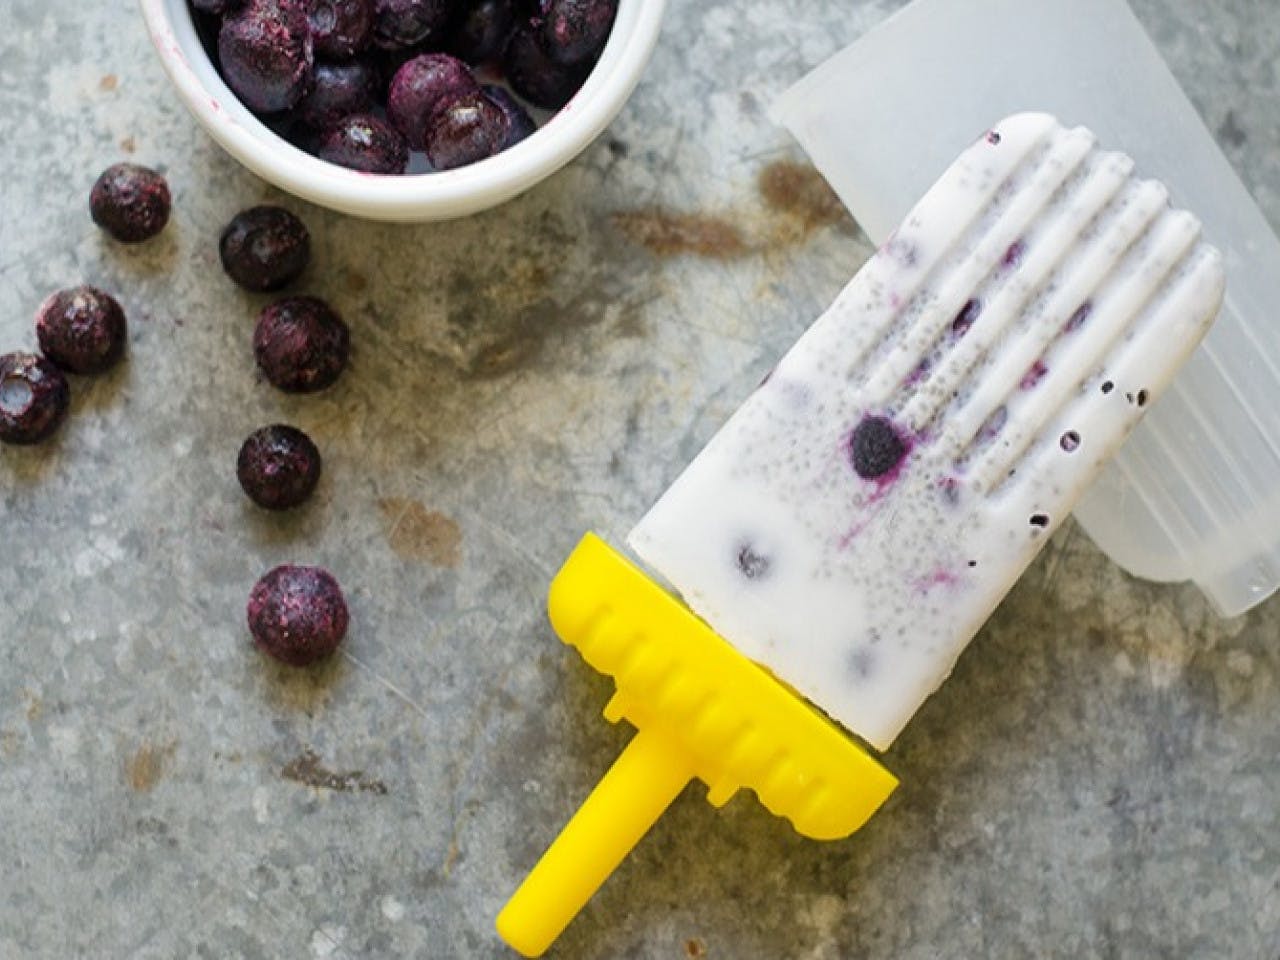 Chia-coconut ice lollies with blueberries